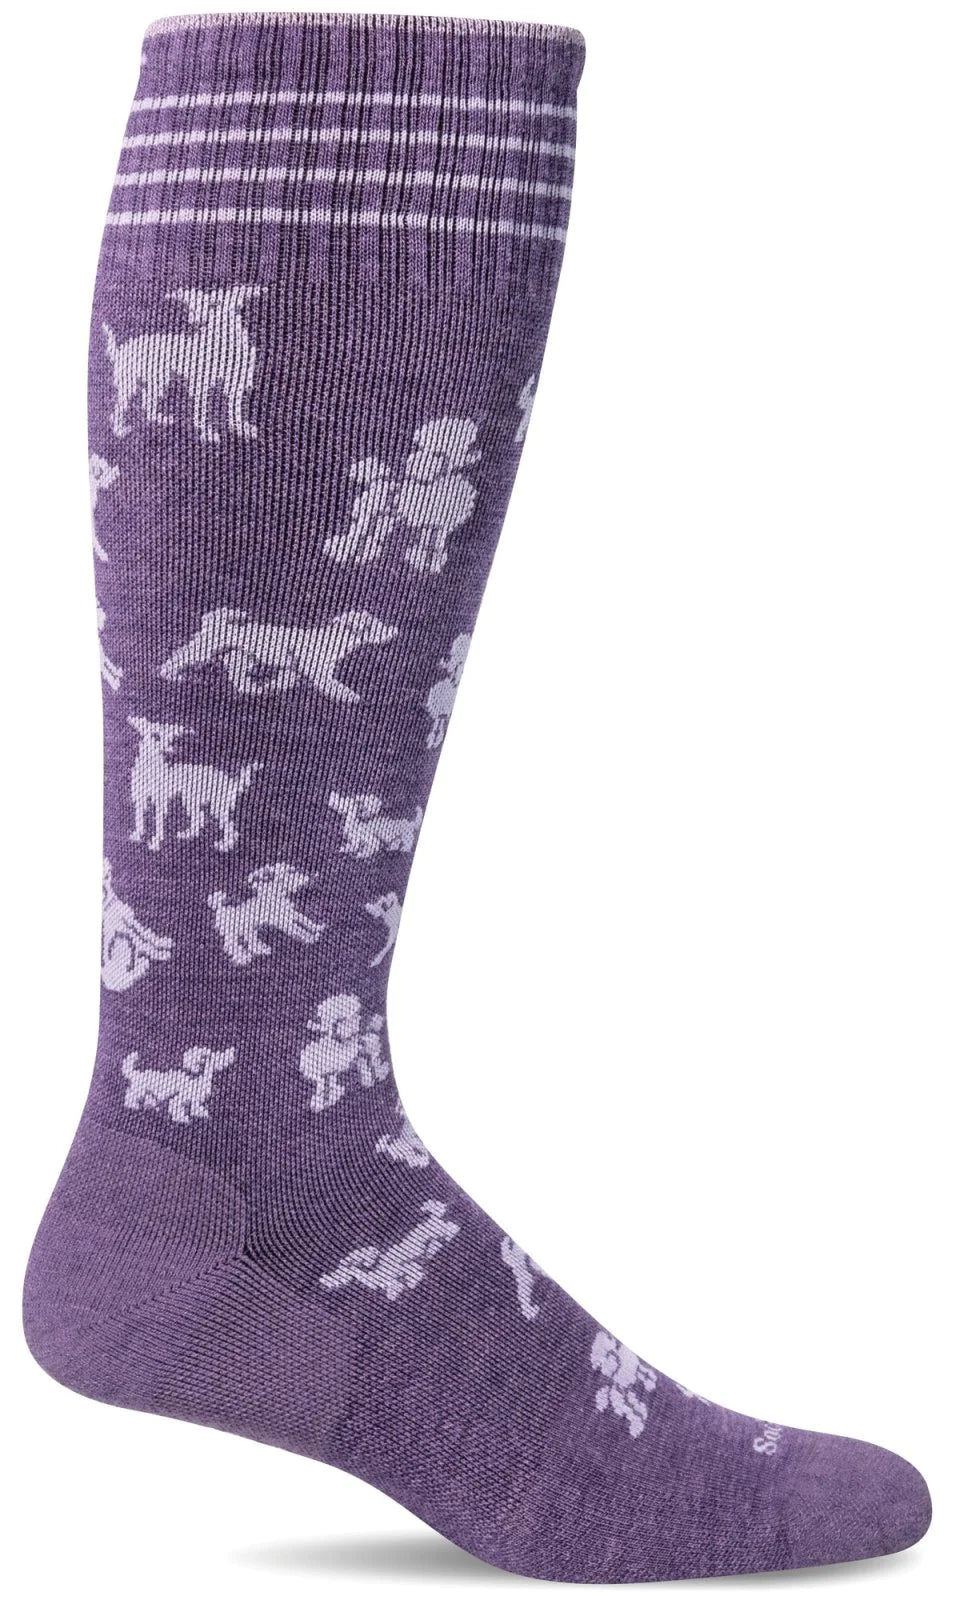 SOCKWELL WOMEN'S BEST IN SHOW - MODERATE GRADUATED COMPRESSION SOCKS - PLUM